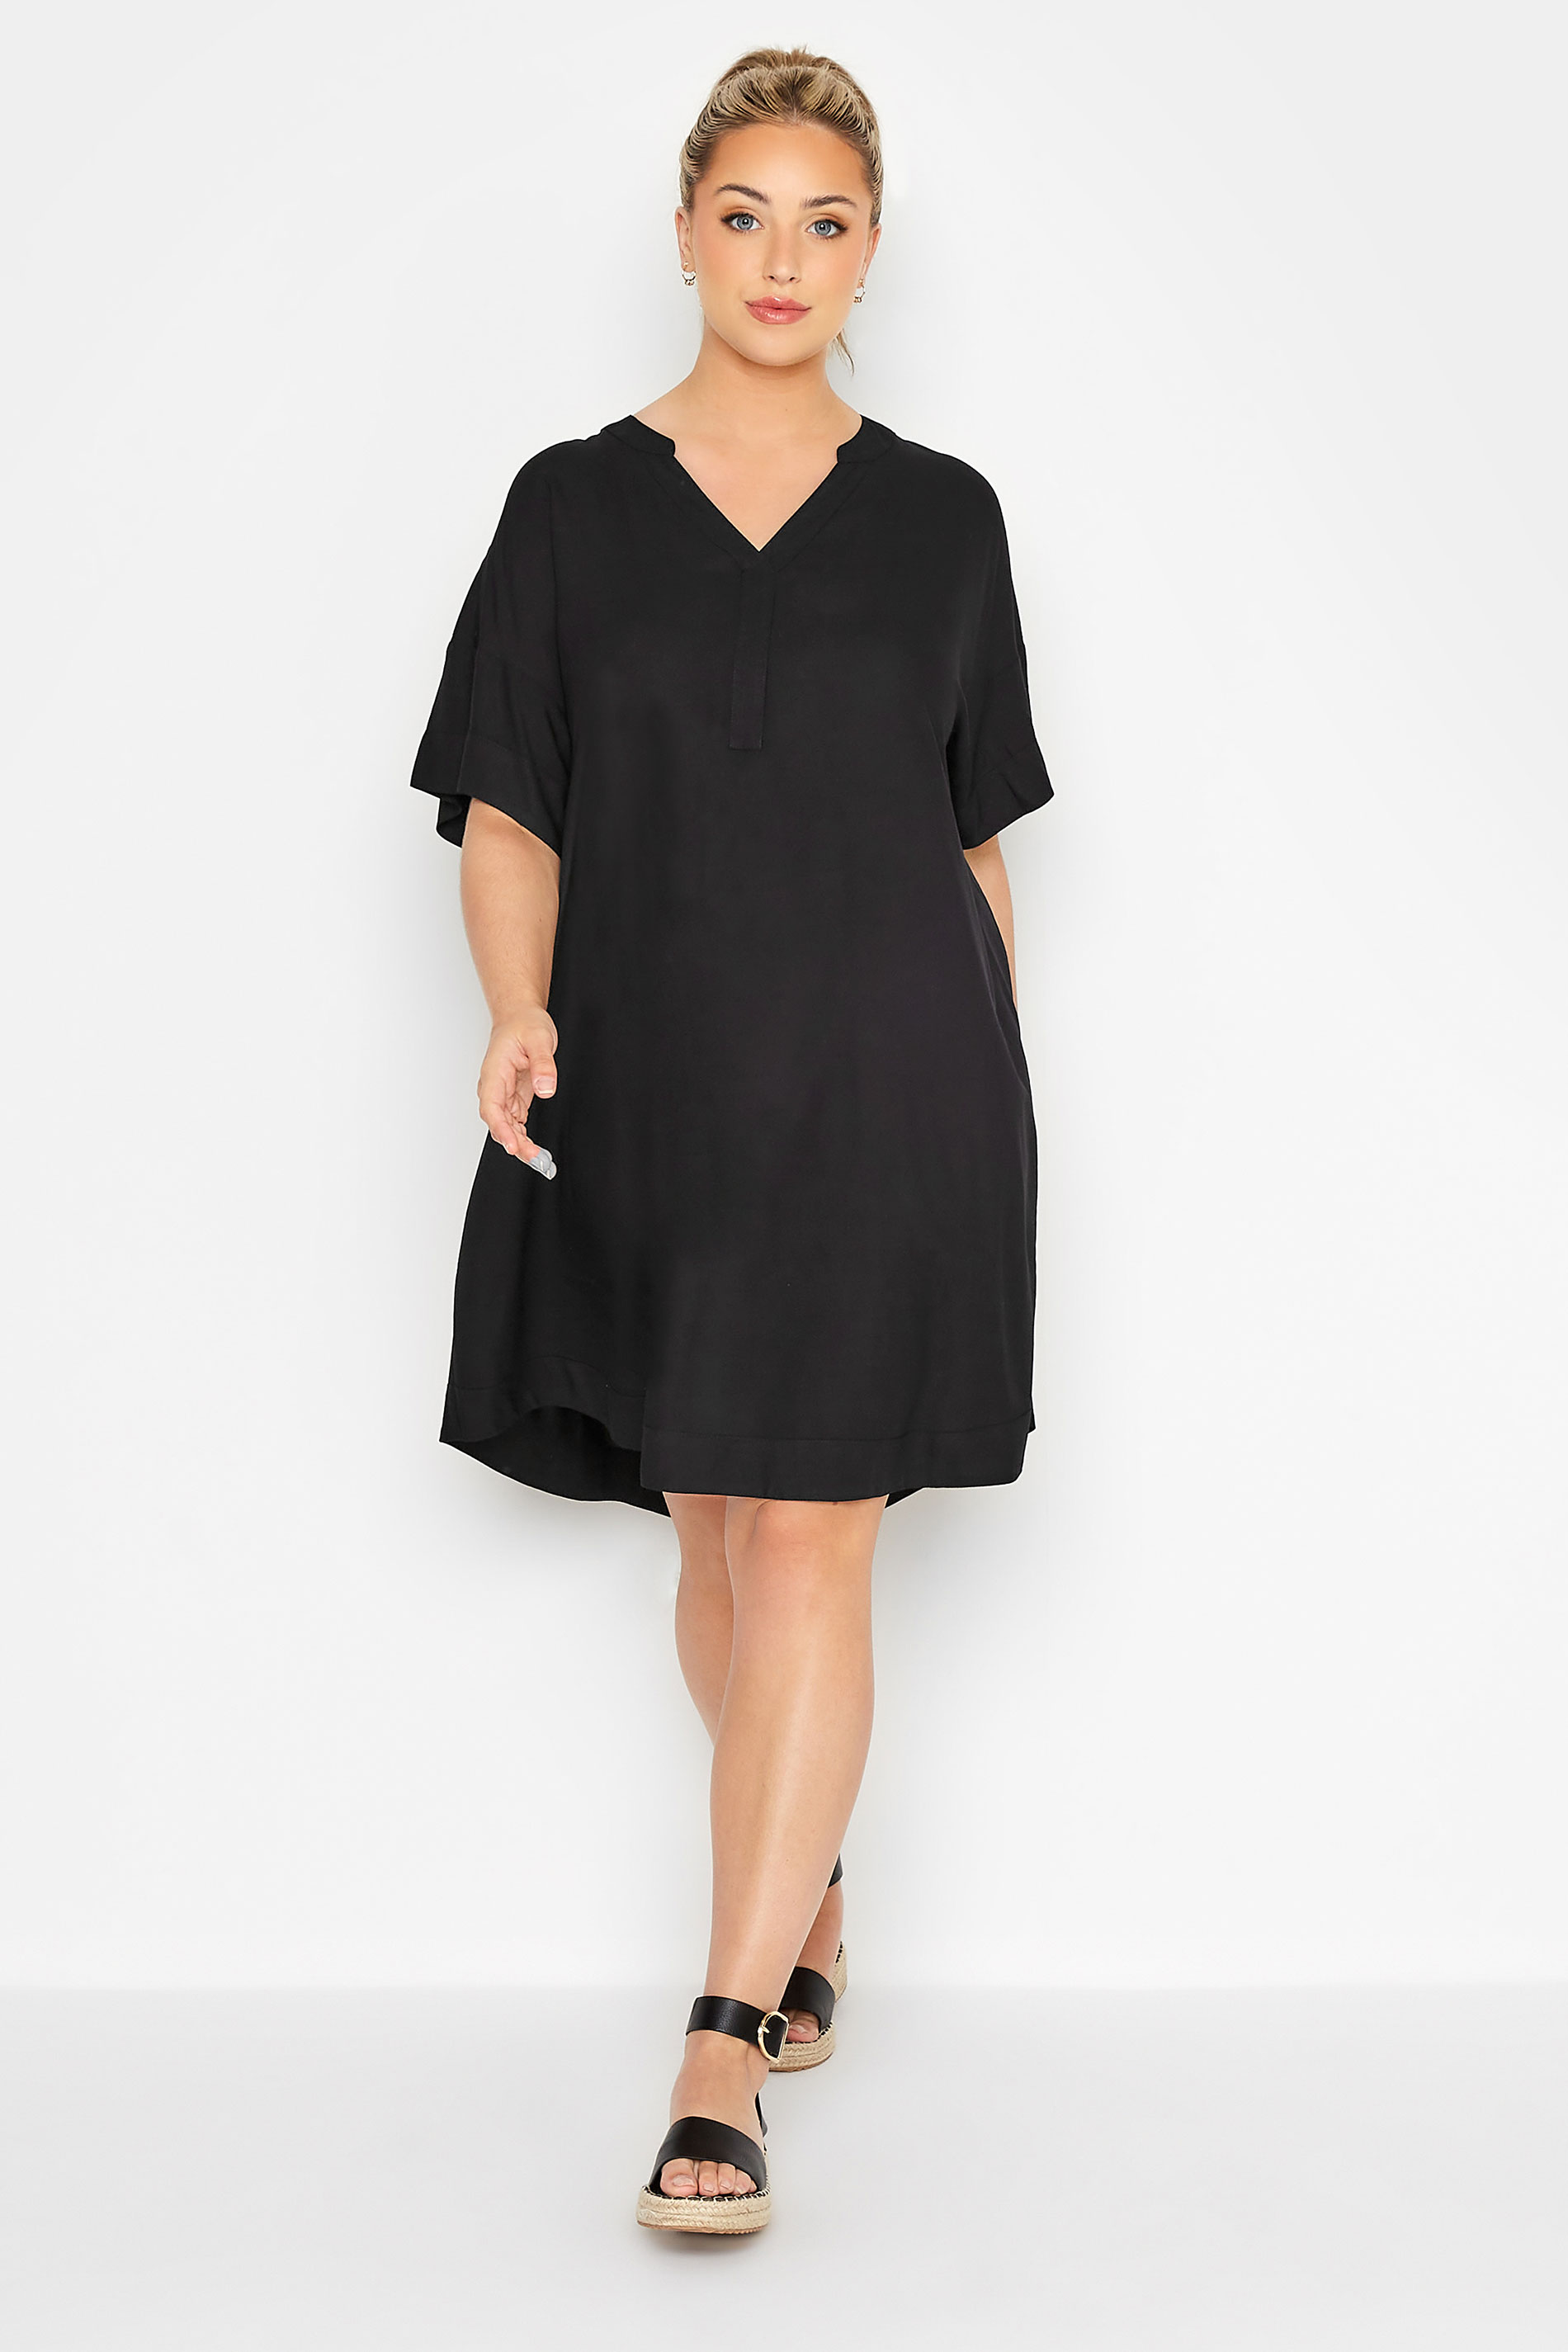 LIMITED COLLECTION Black Notch Neck Summer Throw On Dress | Yours Clothing 1